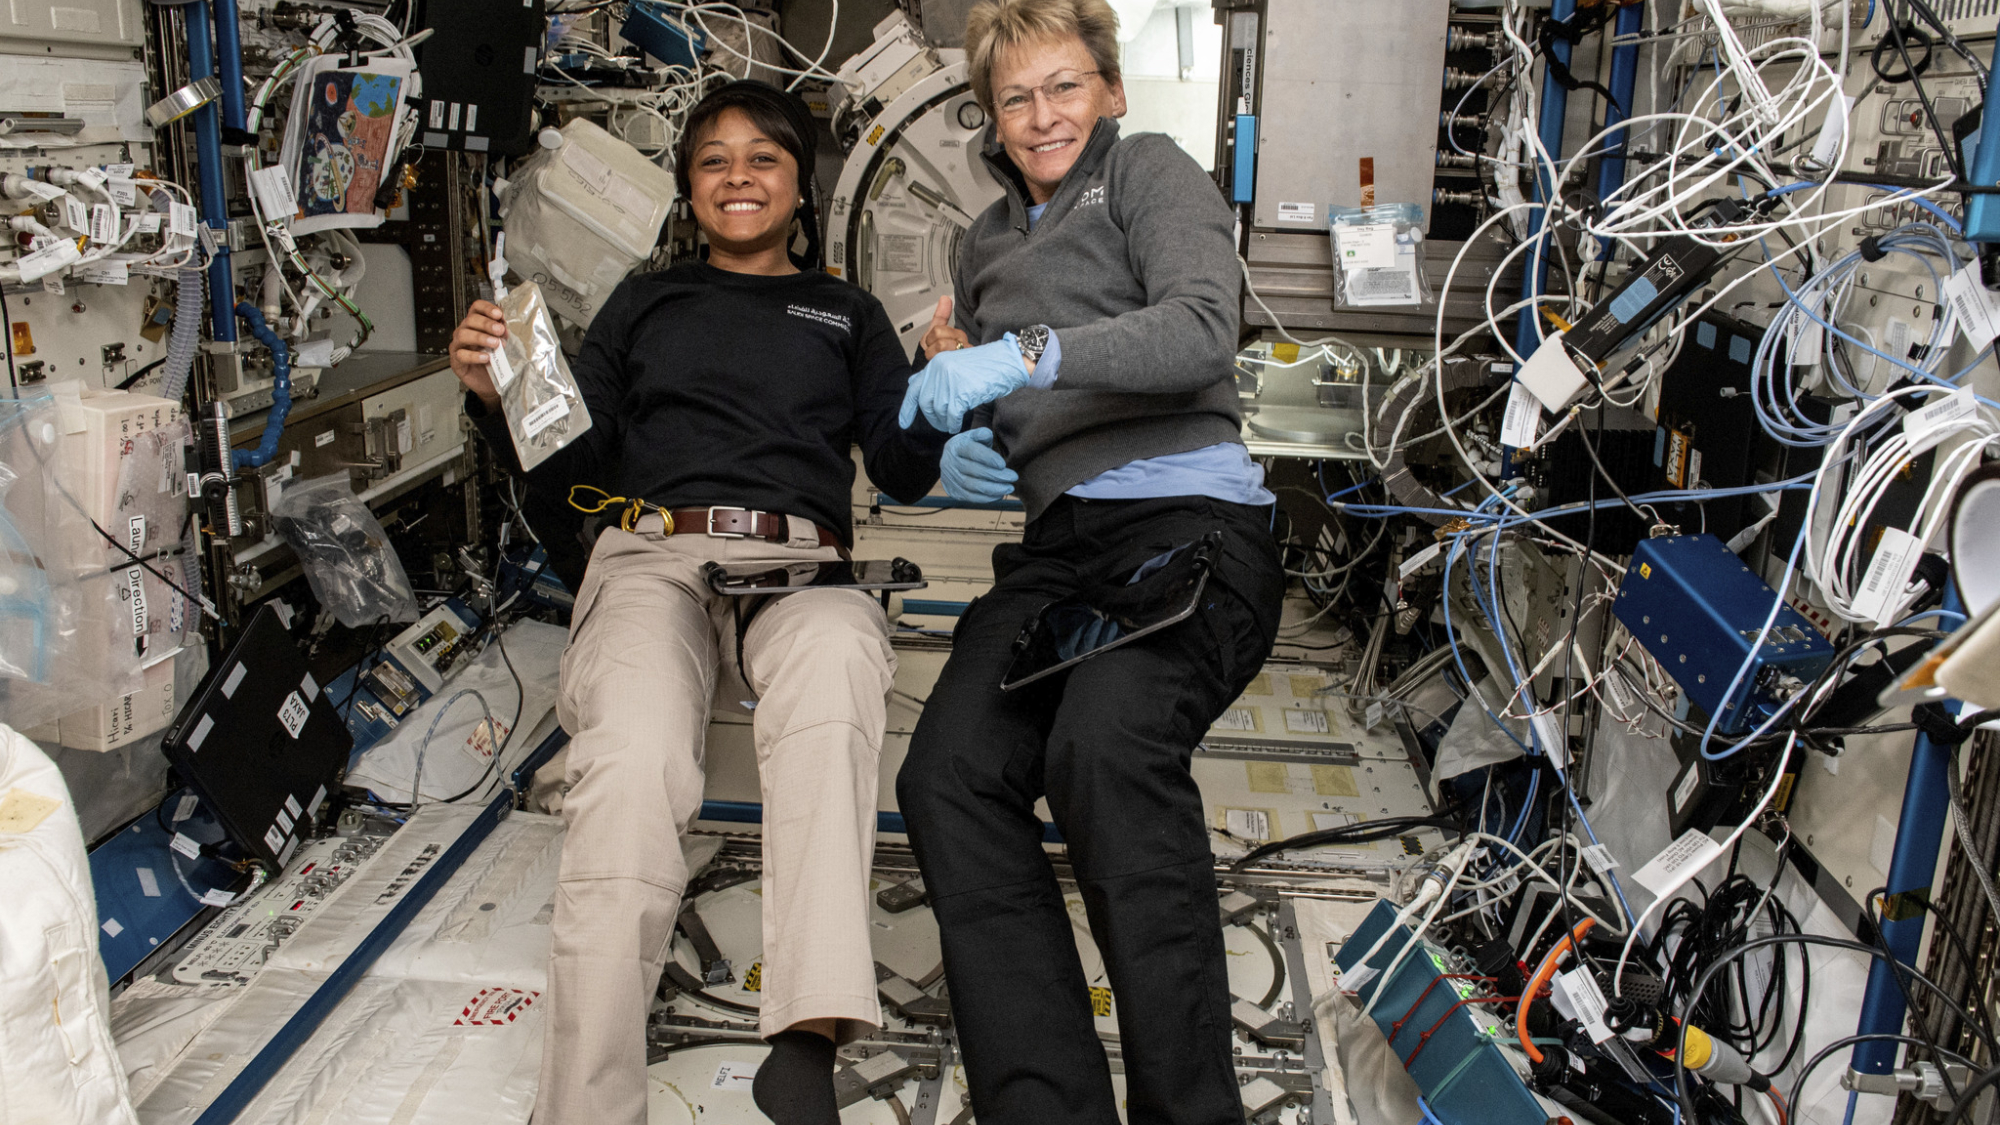 Axiom Space Ax-2 astronauts Rayyanah Barnawi on the left and Ax-2 commander Peggy Whitson smile for a photo surrounded by science gear on International Space Station.